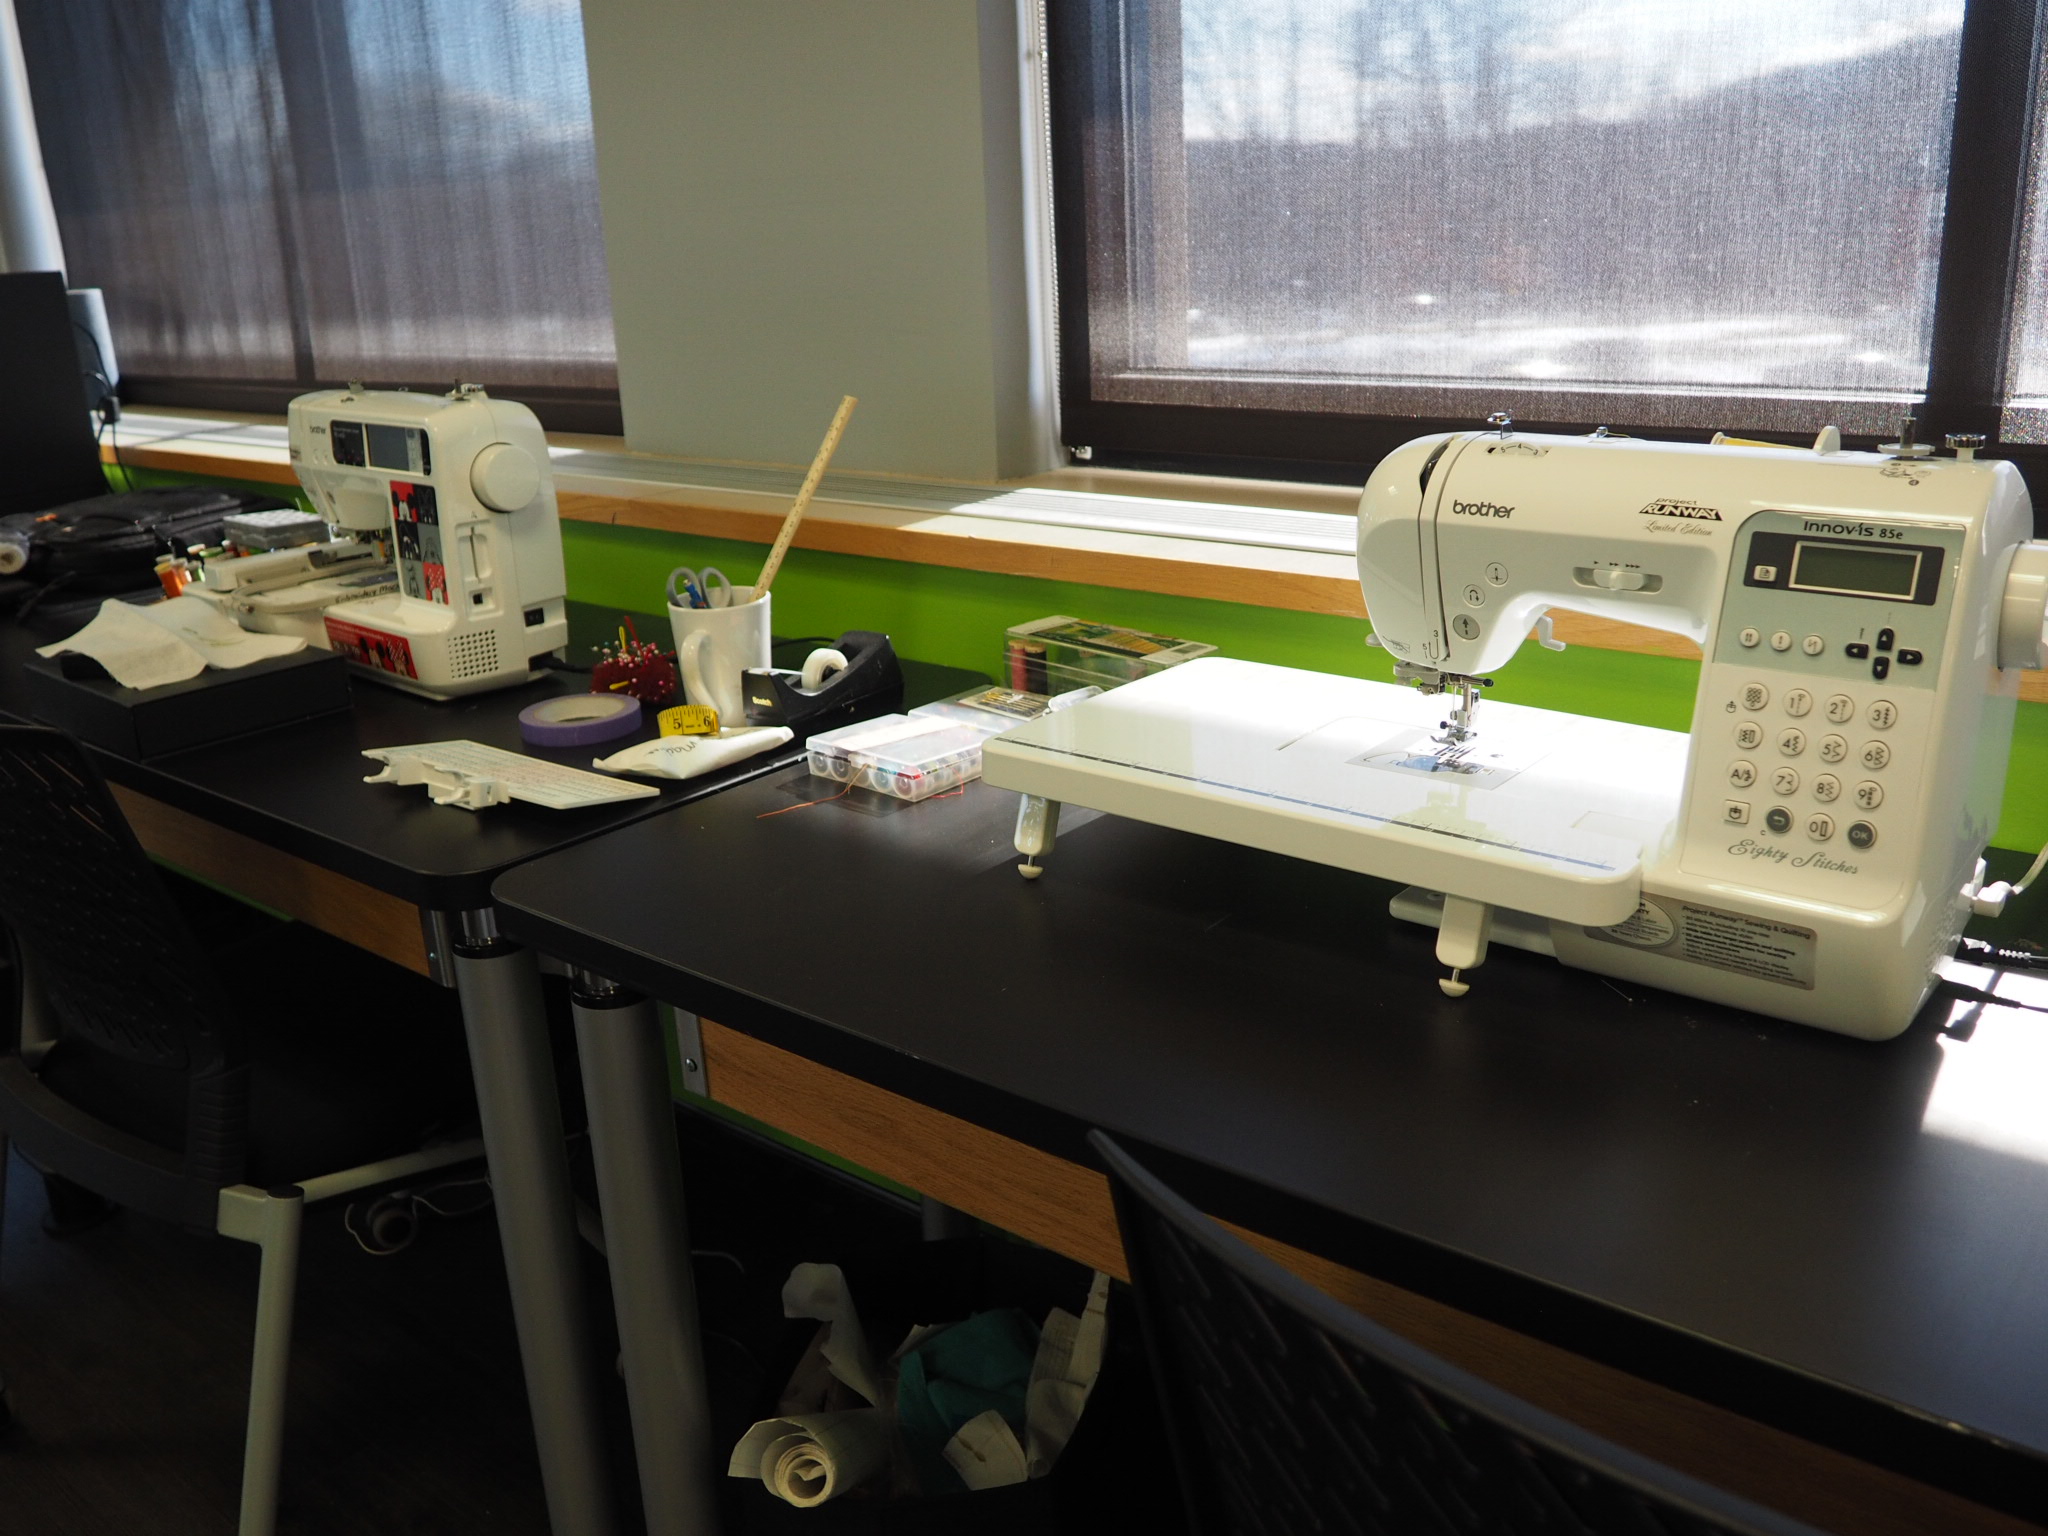 Sewing & Embroidery Station